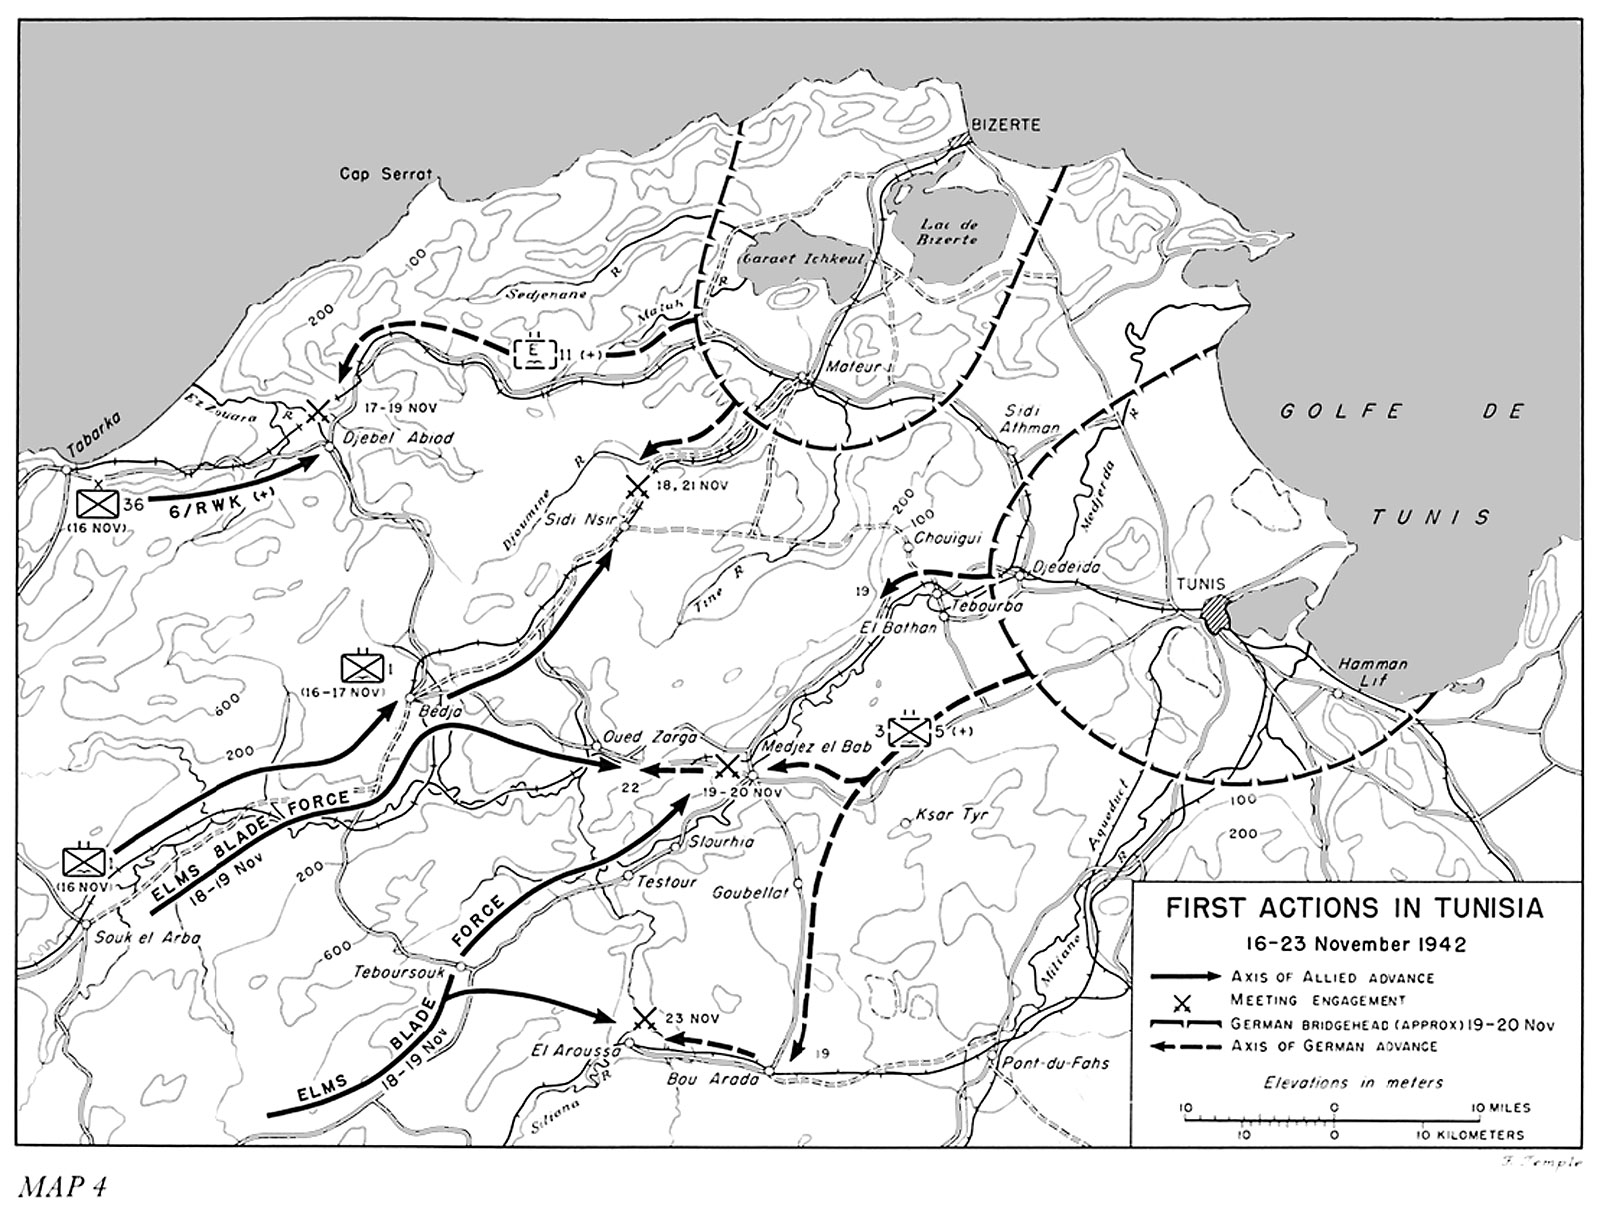 Map of first Allied actions in Tunisia, 16-23 November 1942 (US Army Center of Military History)